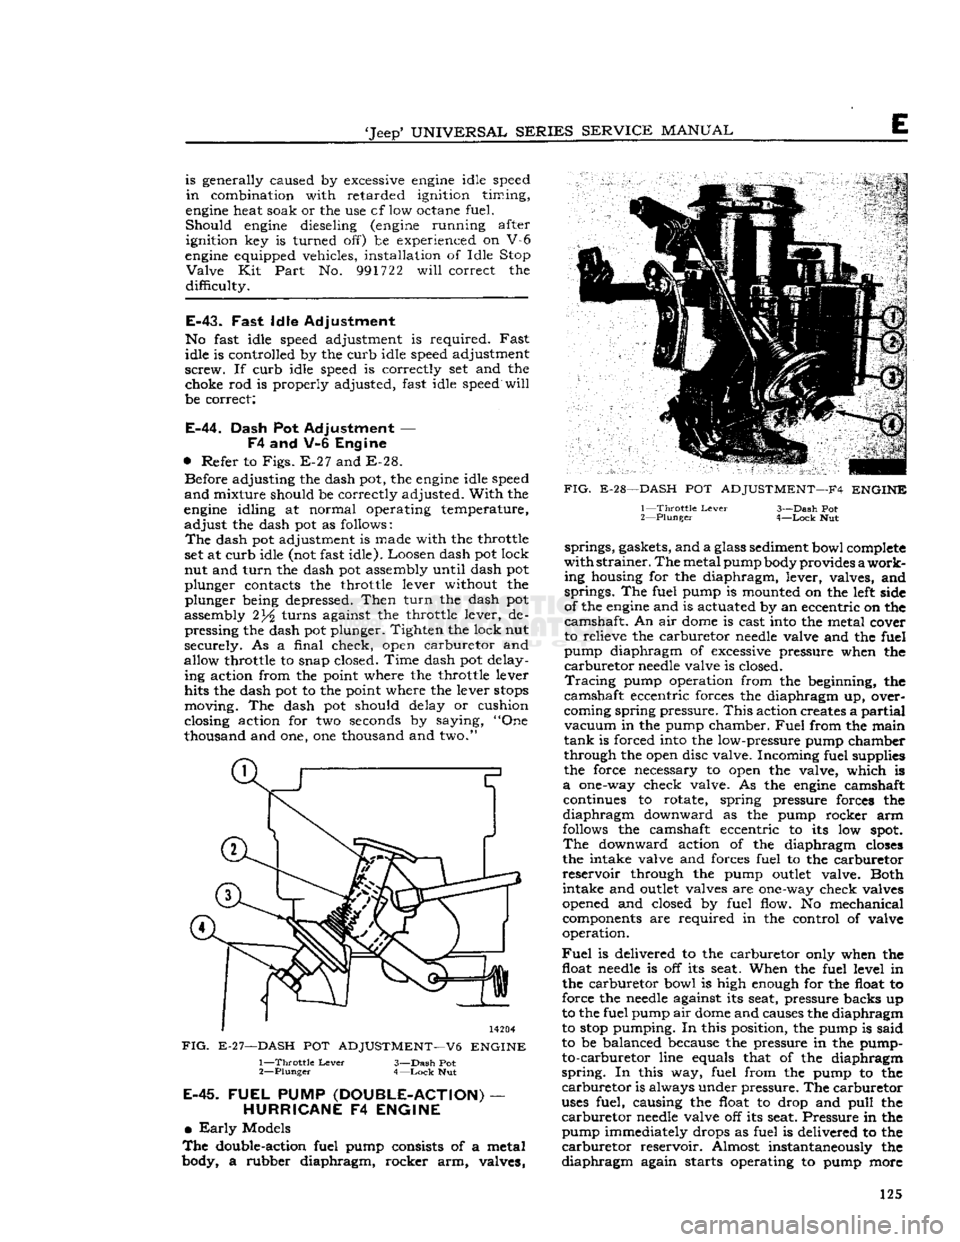 JEEP CJ 1953  Service Manual 
Jeep
 UNIVERSAL
 SERIES
 SERVICE
 MANUAL 

E 
is generally caused by excessive
 engine
 idle speed 

in
 combination with retarded ignition timing, 

engine
 heat soak or the use cf low octane fuel